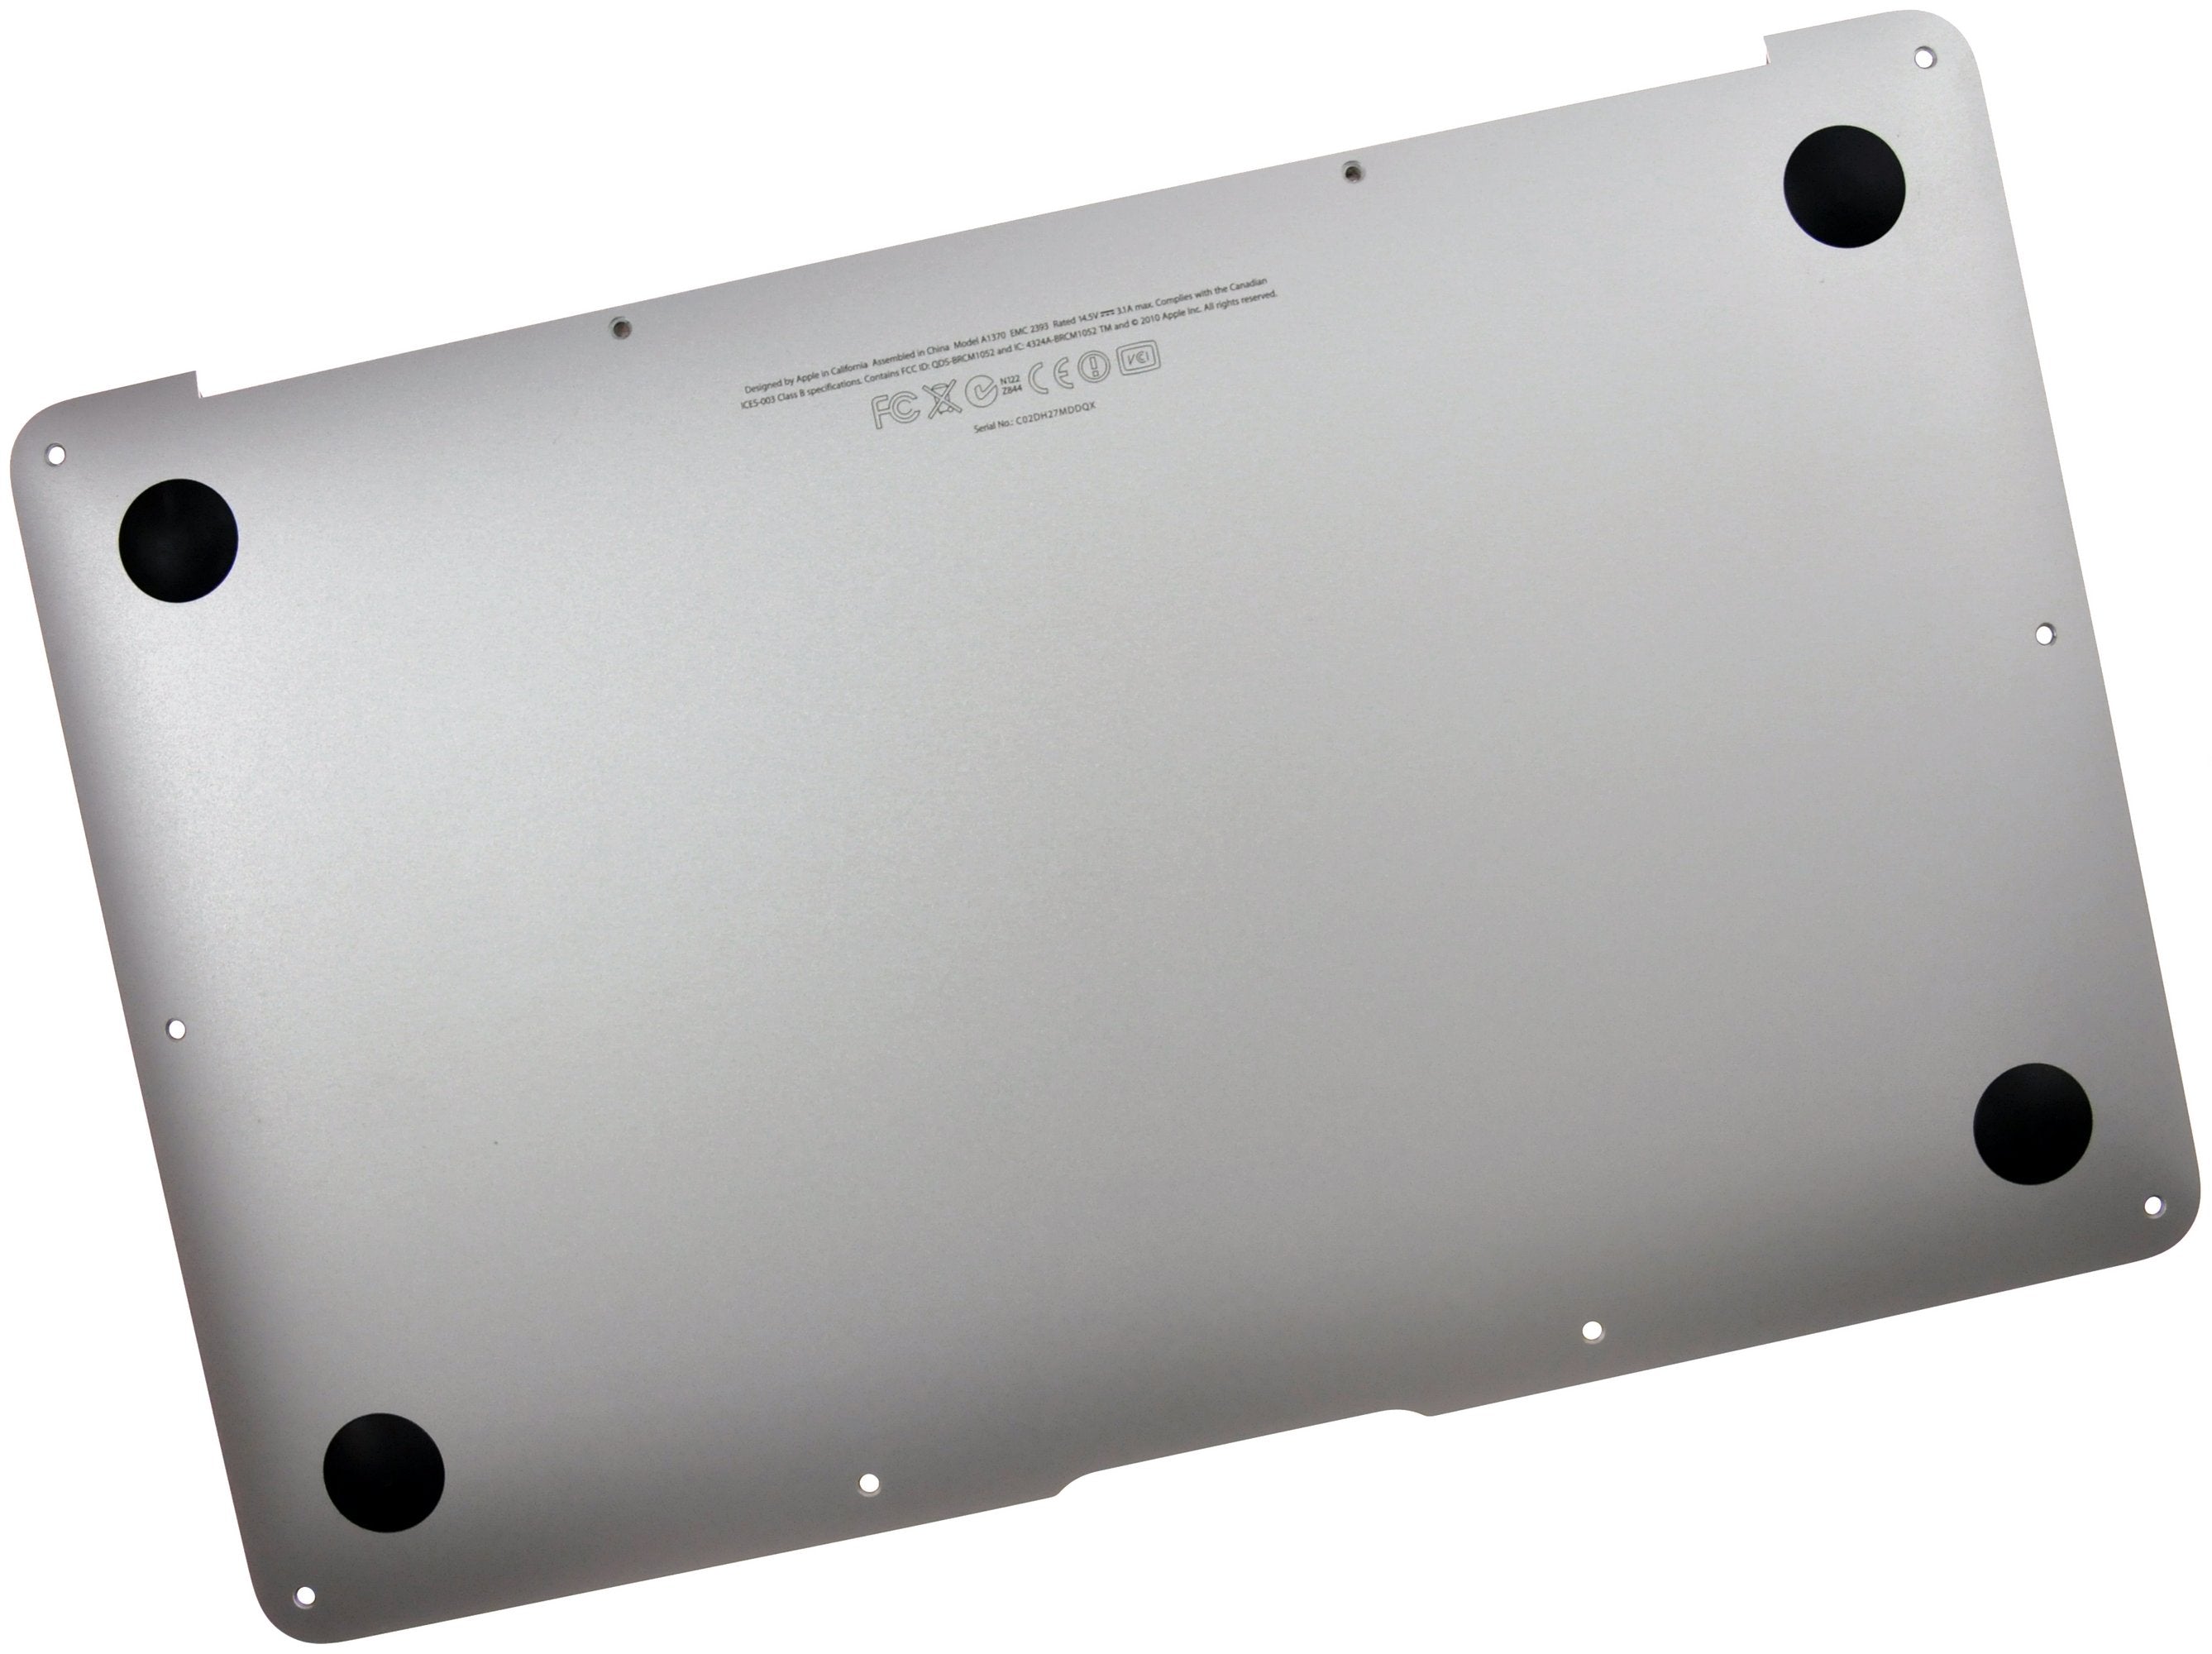 MacBook Air 11" (Late 2010-Mid 2011) Lower Case